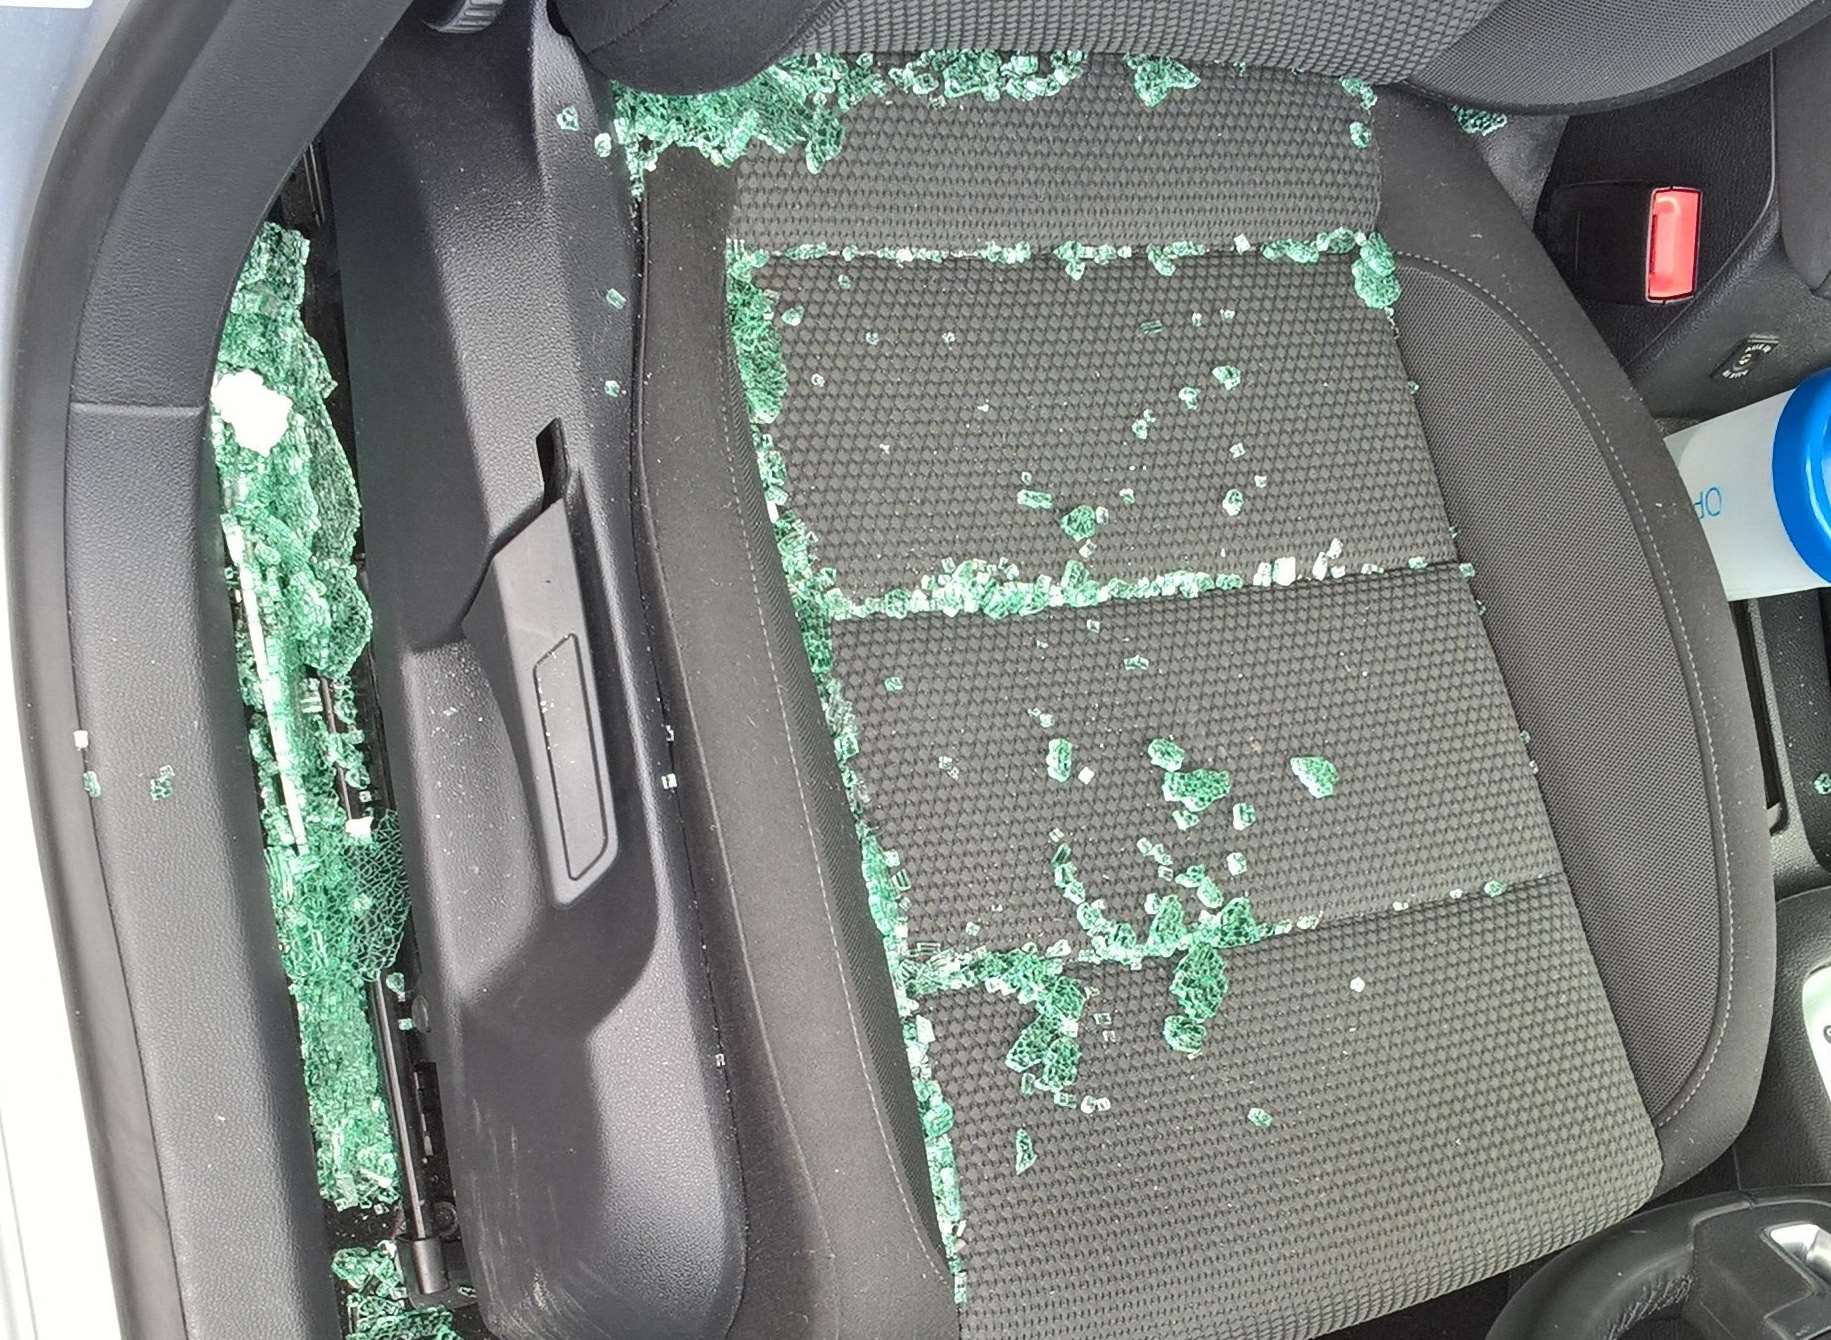 The driver’s side window was shattered